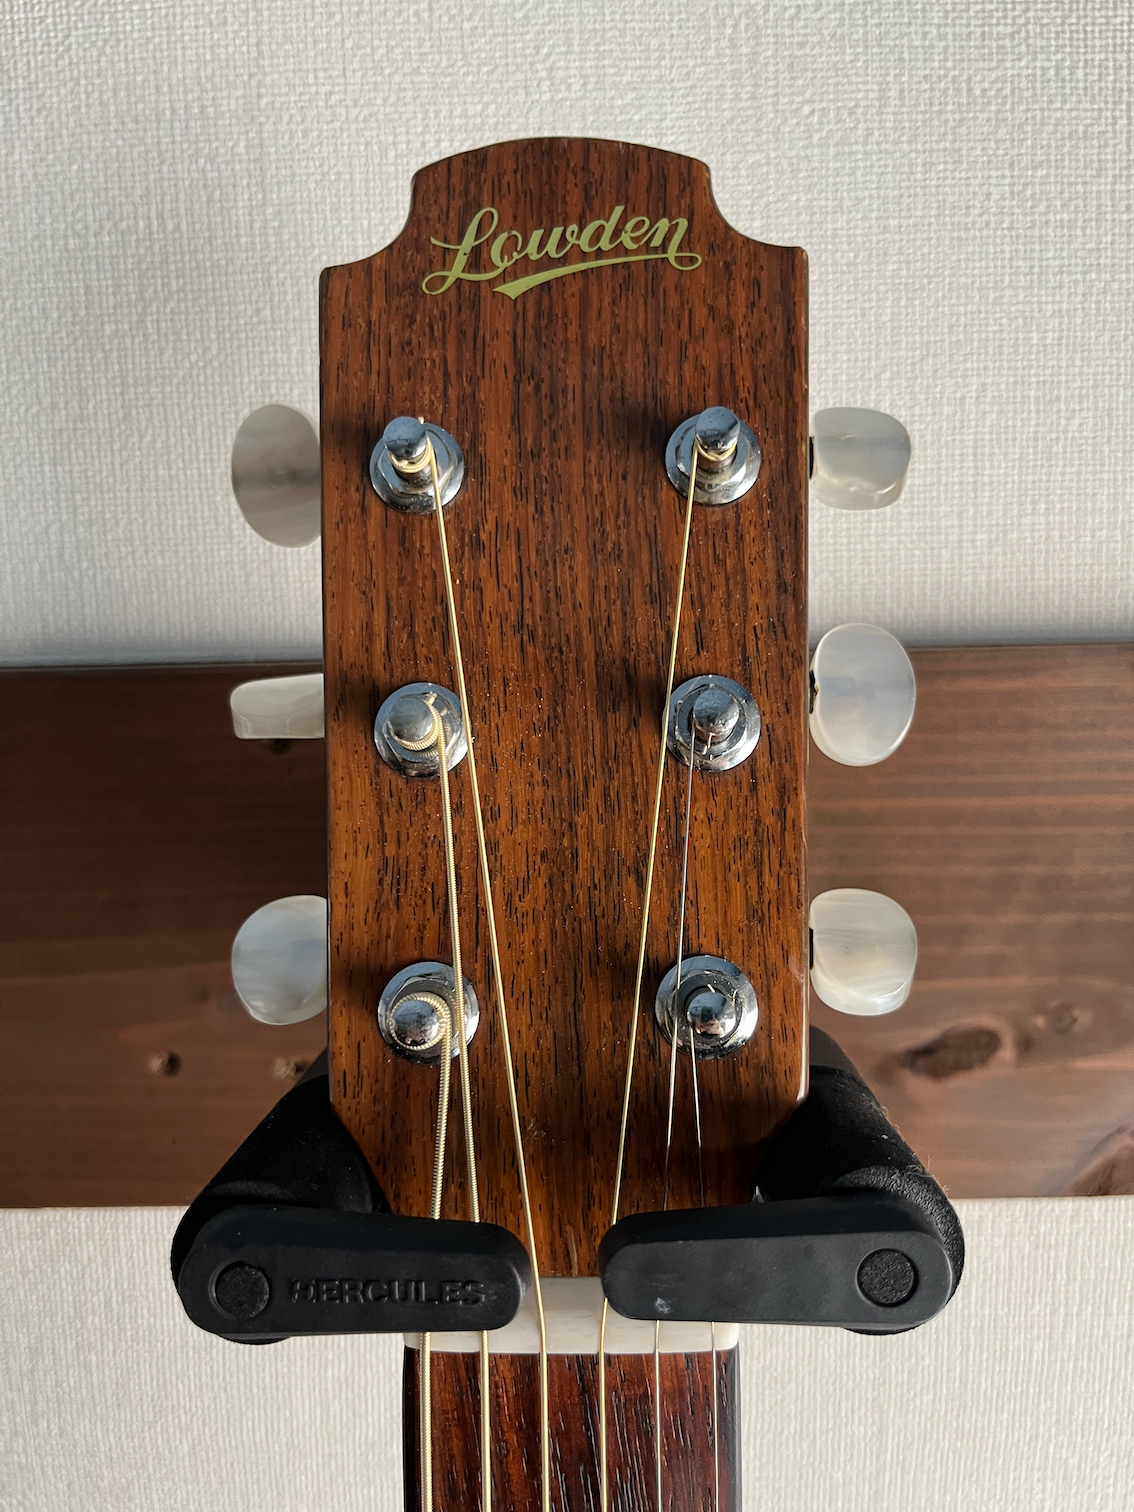 Lowden S5 1980's